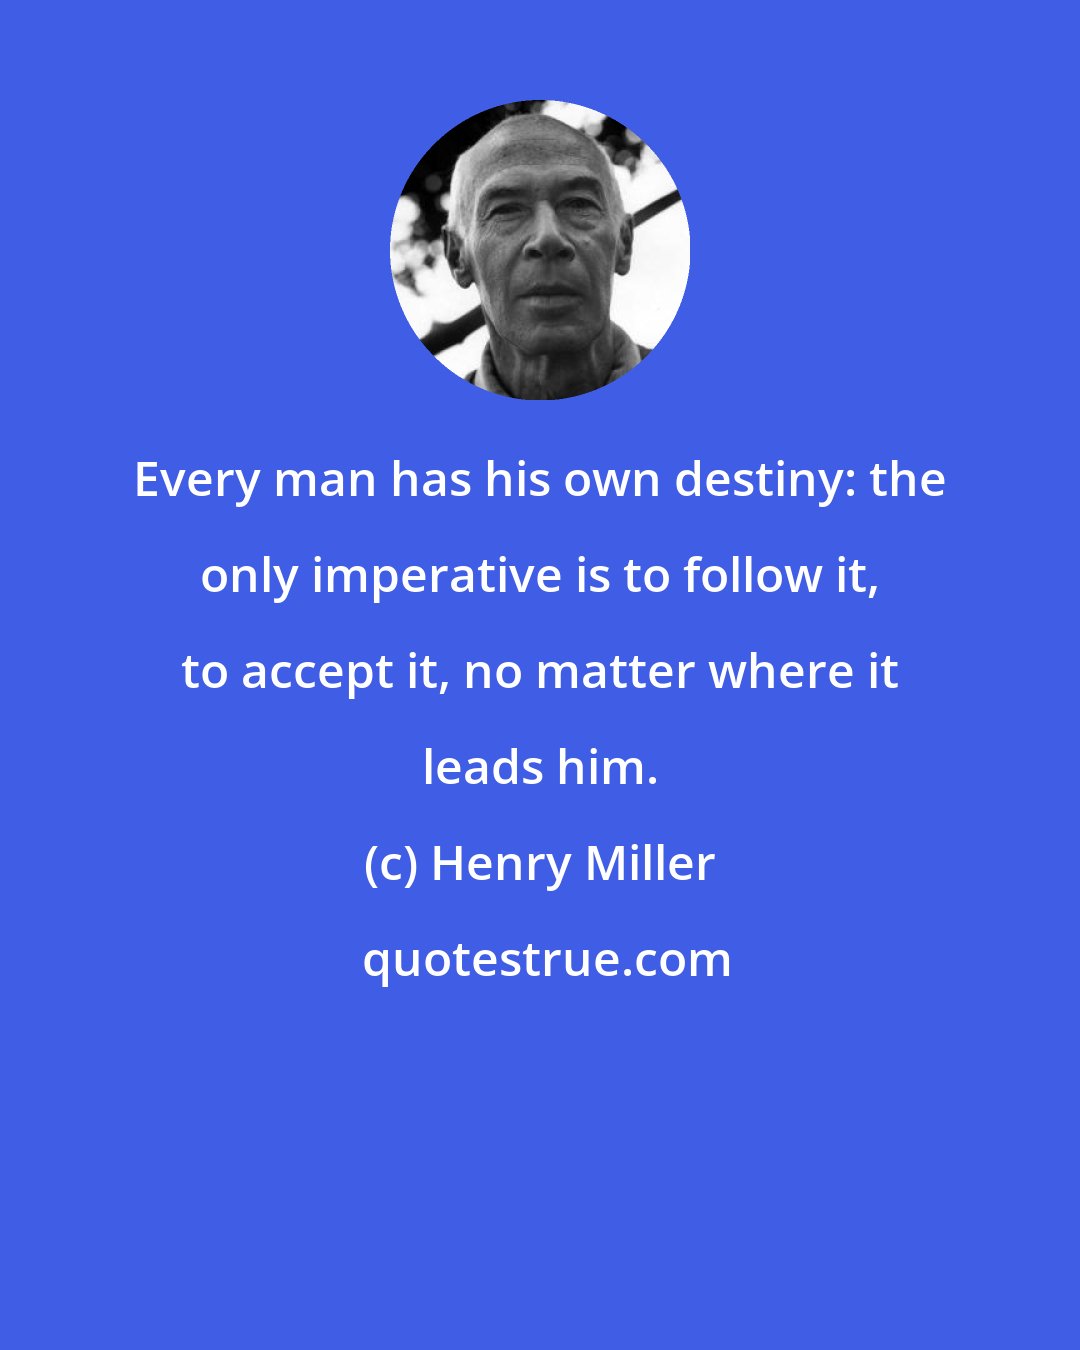 Henry Miller: Every man has his own destiny: the only imperative is to follow it, to accept it, no matter where it leads him.